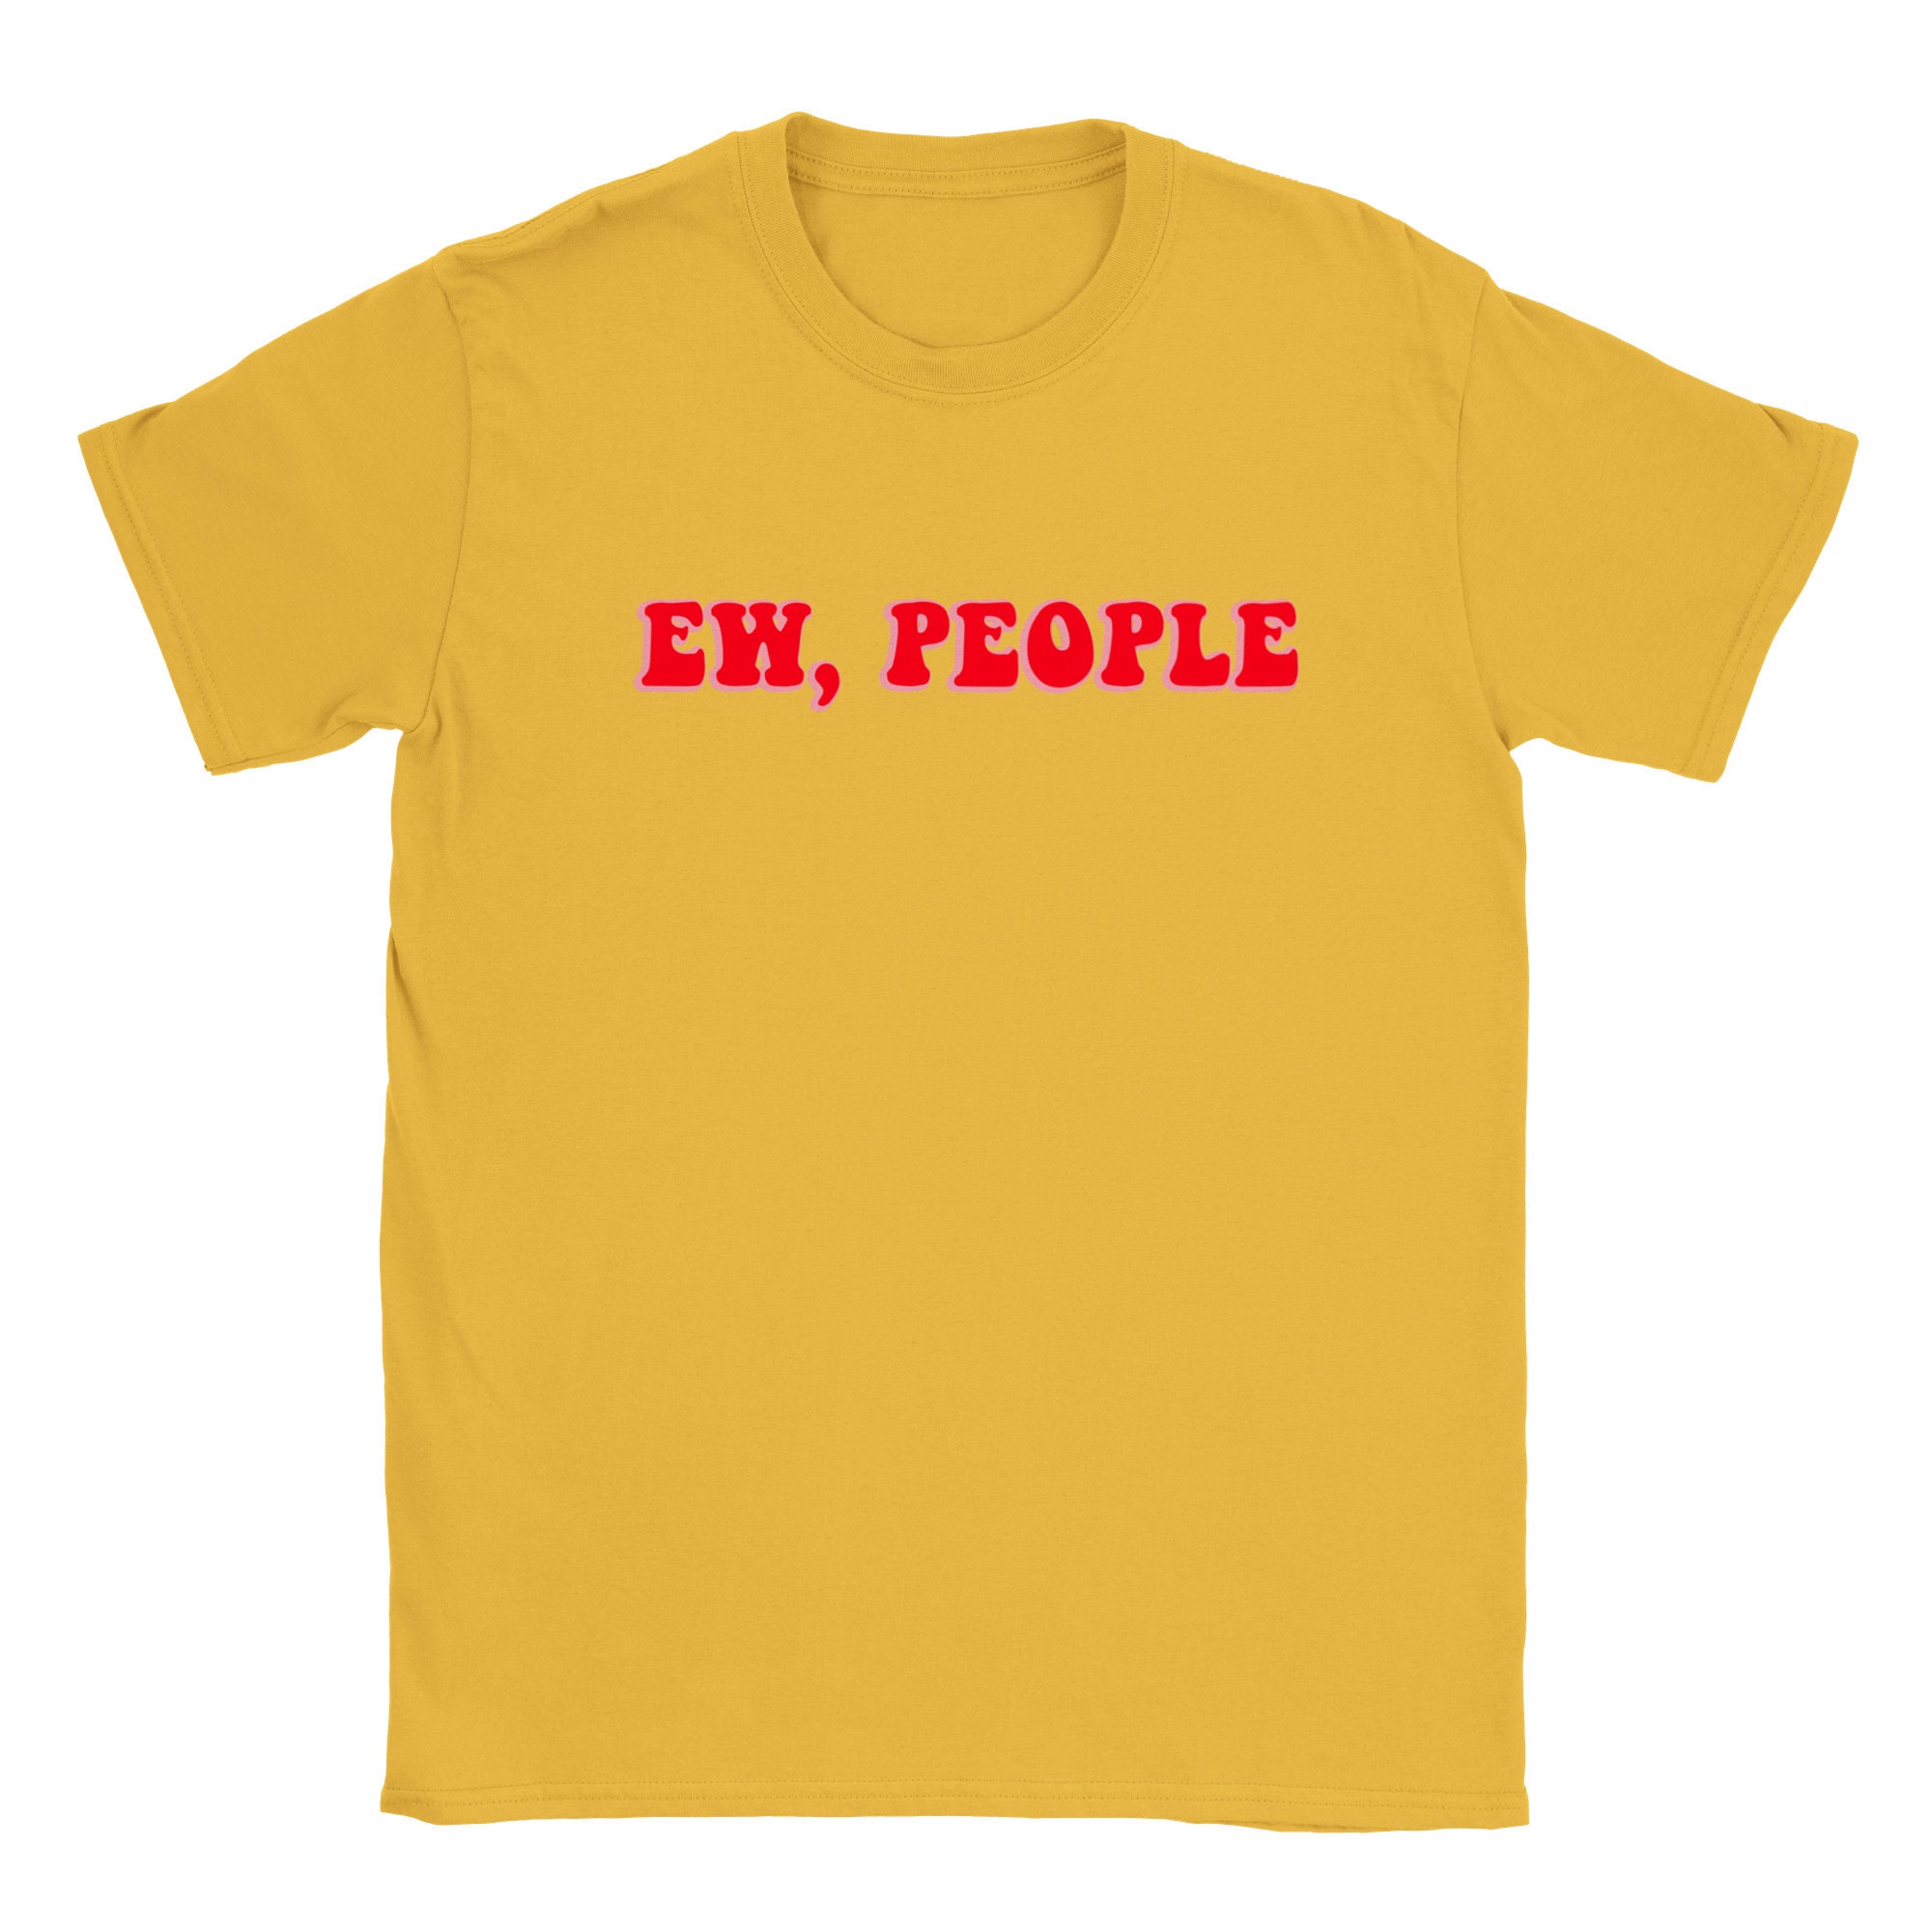 ew people t shirt fashion tumblr quote funny joke antisocial not a morning person swag dope unisex Classic Unisex Crewneck T-shirt